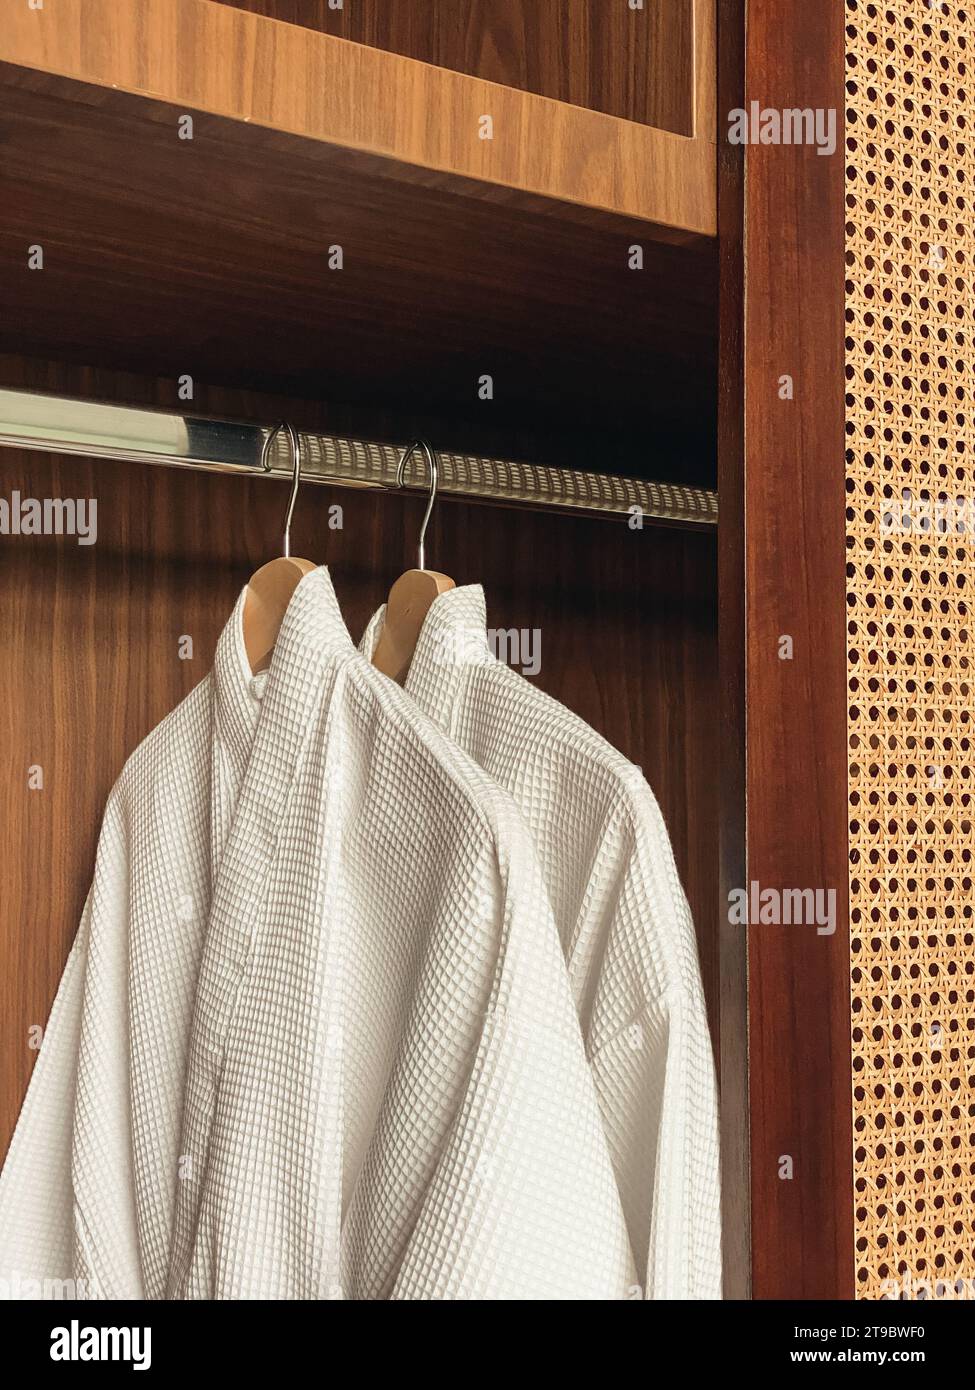 https://c8.alamy.com/comp/2T9BWF0/two-white-clean-bathrobes-hanging-in-wooden-wardrobe-at-luxury-hotel-or-home-relax-and-travel-concept-2T9BWF0.jpg